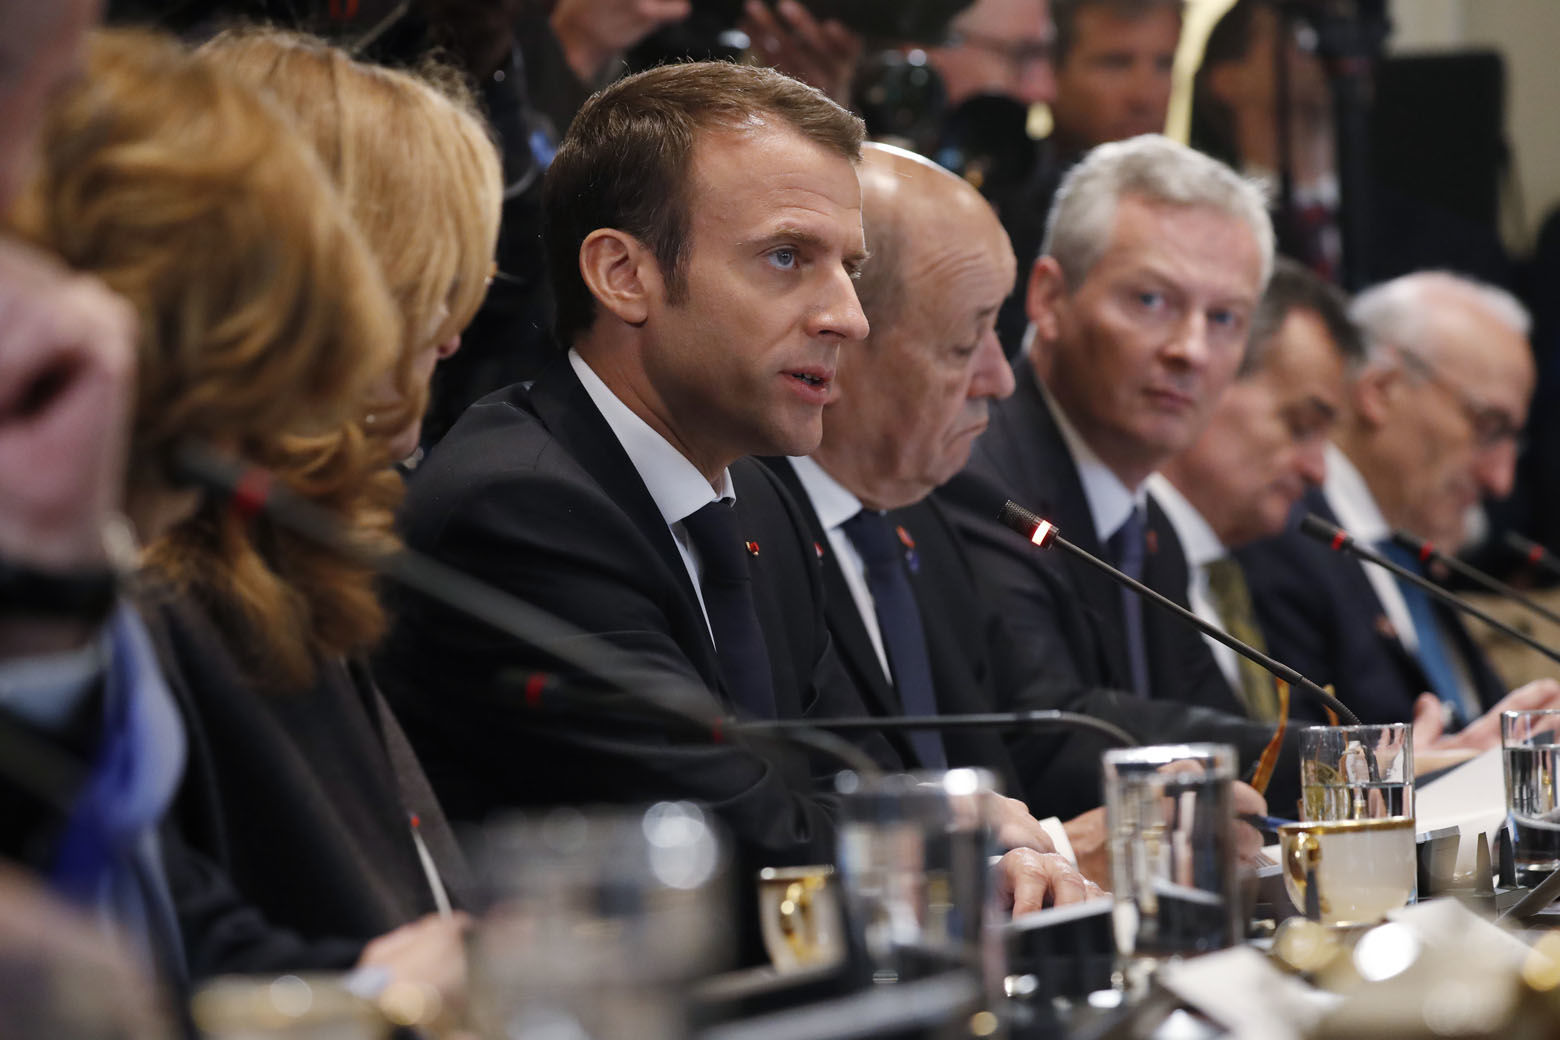 French President Emmanuel Macron speaks during a meeting with President Donald Trump in the Cabinet Room of the White House in Washington, Tuesday, April 24, 2018. (AP Photo/Pablo Martinez Monsivais)